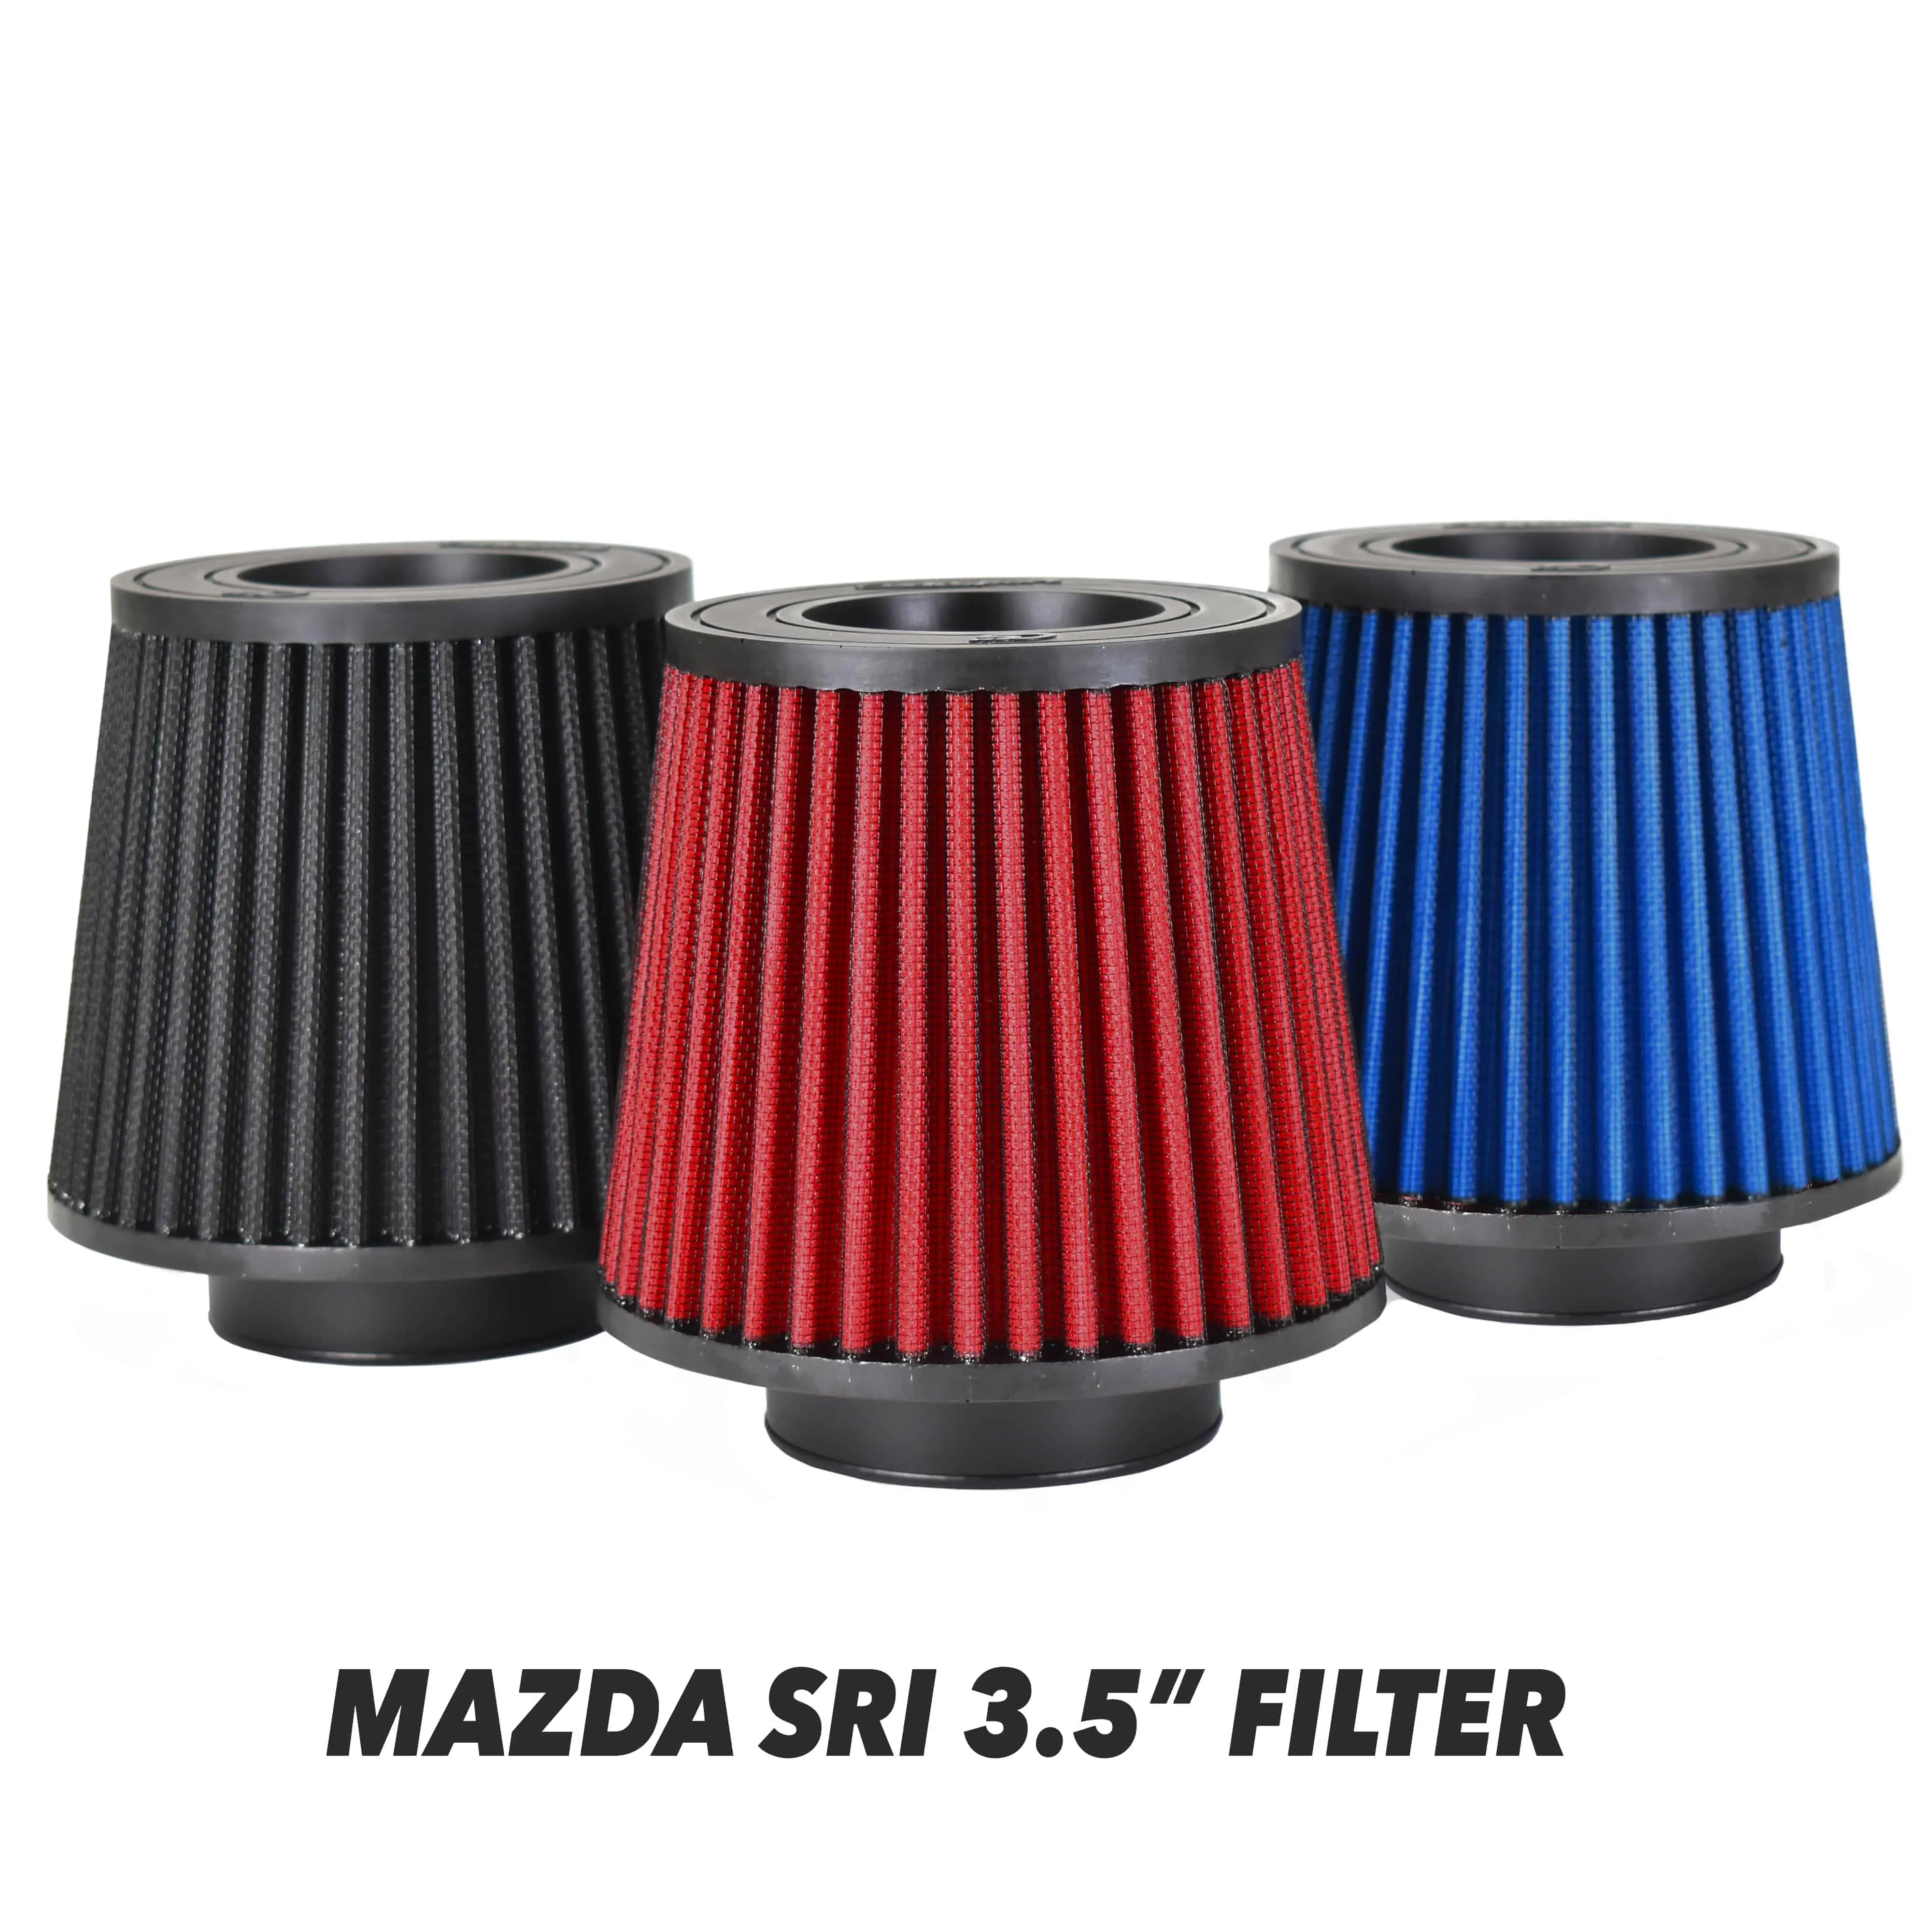 Mazdaspeed and Mazdaspeed 3 high flow air filter for intake systems